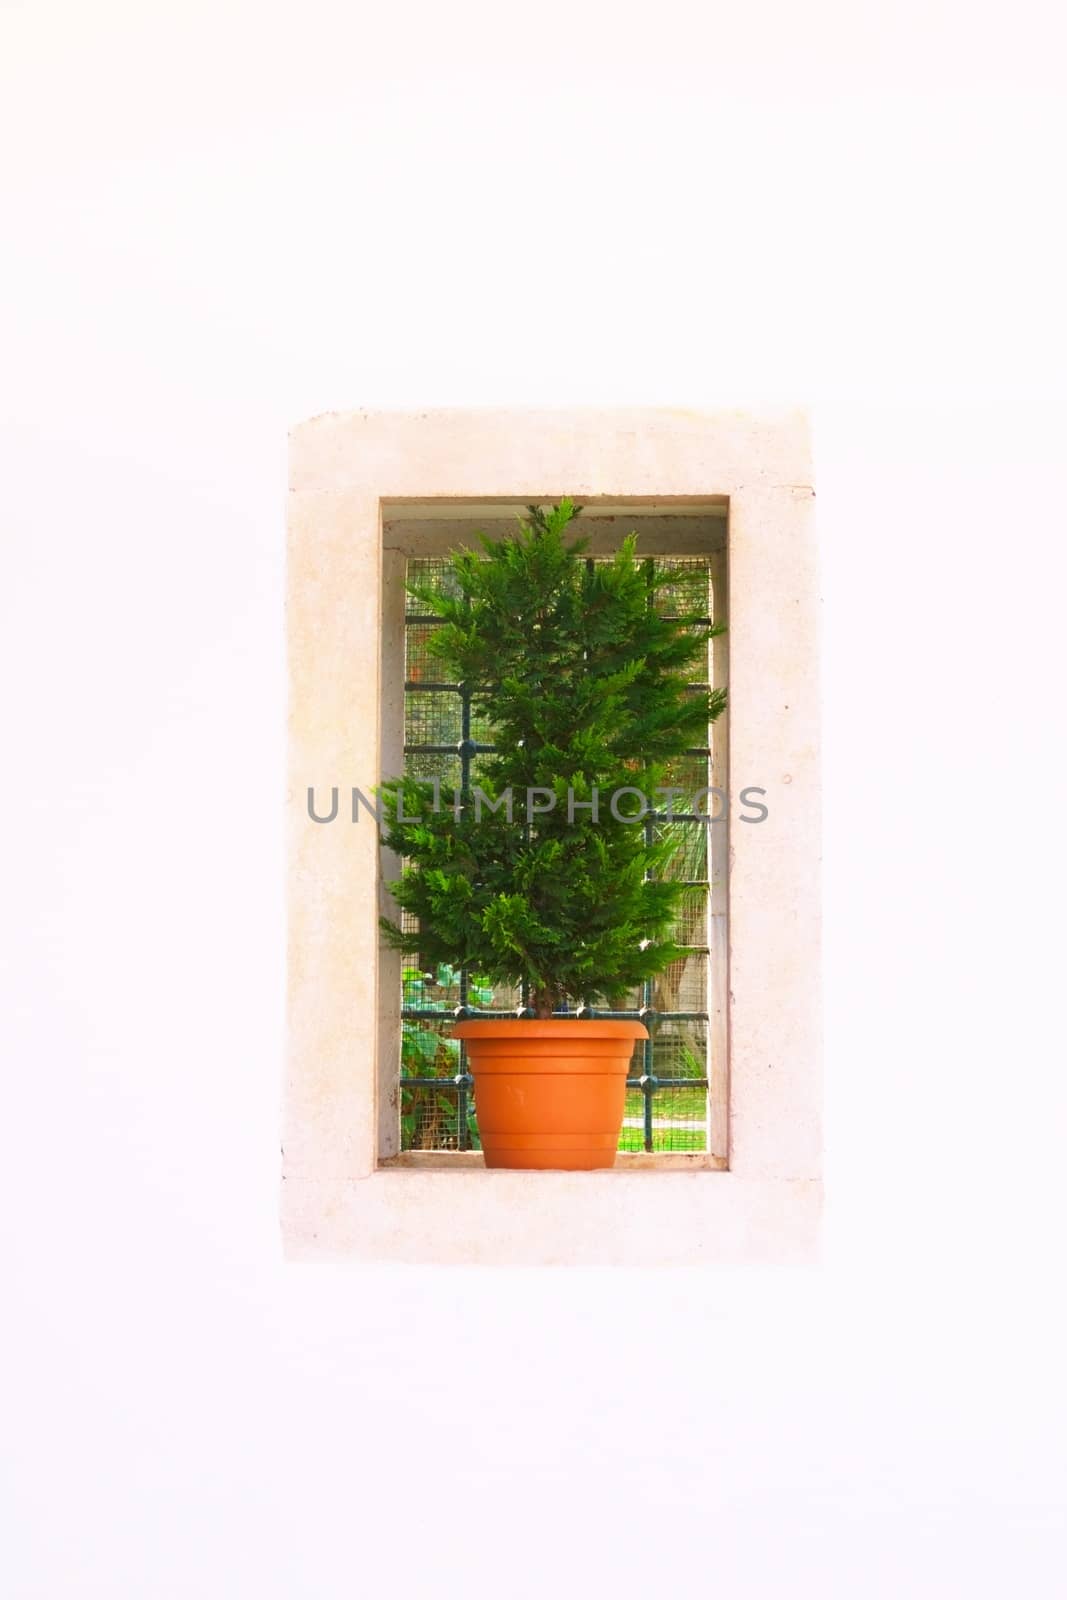 Small tree on a rectangular window on a white wall. Architectural detail, decorative plant. by hernan_hyper